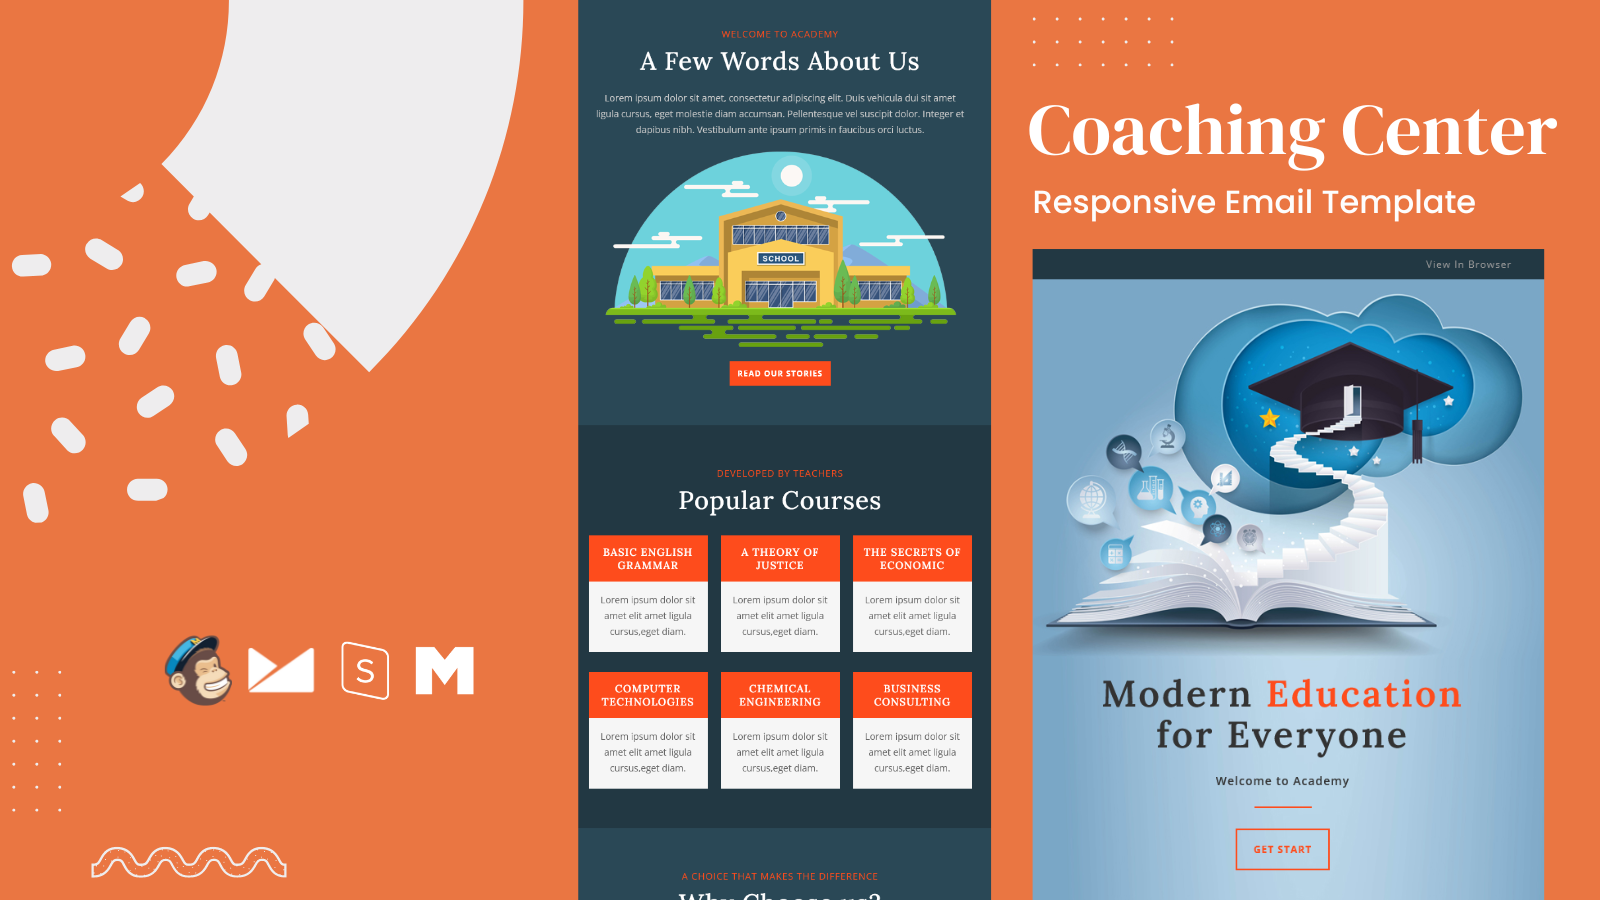 Coaching Center – Responsive Email Template